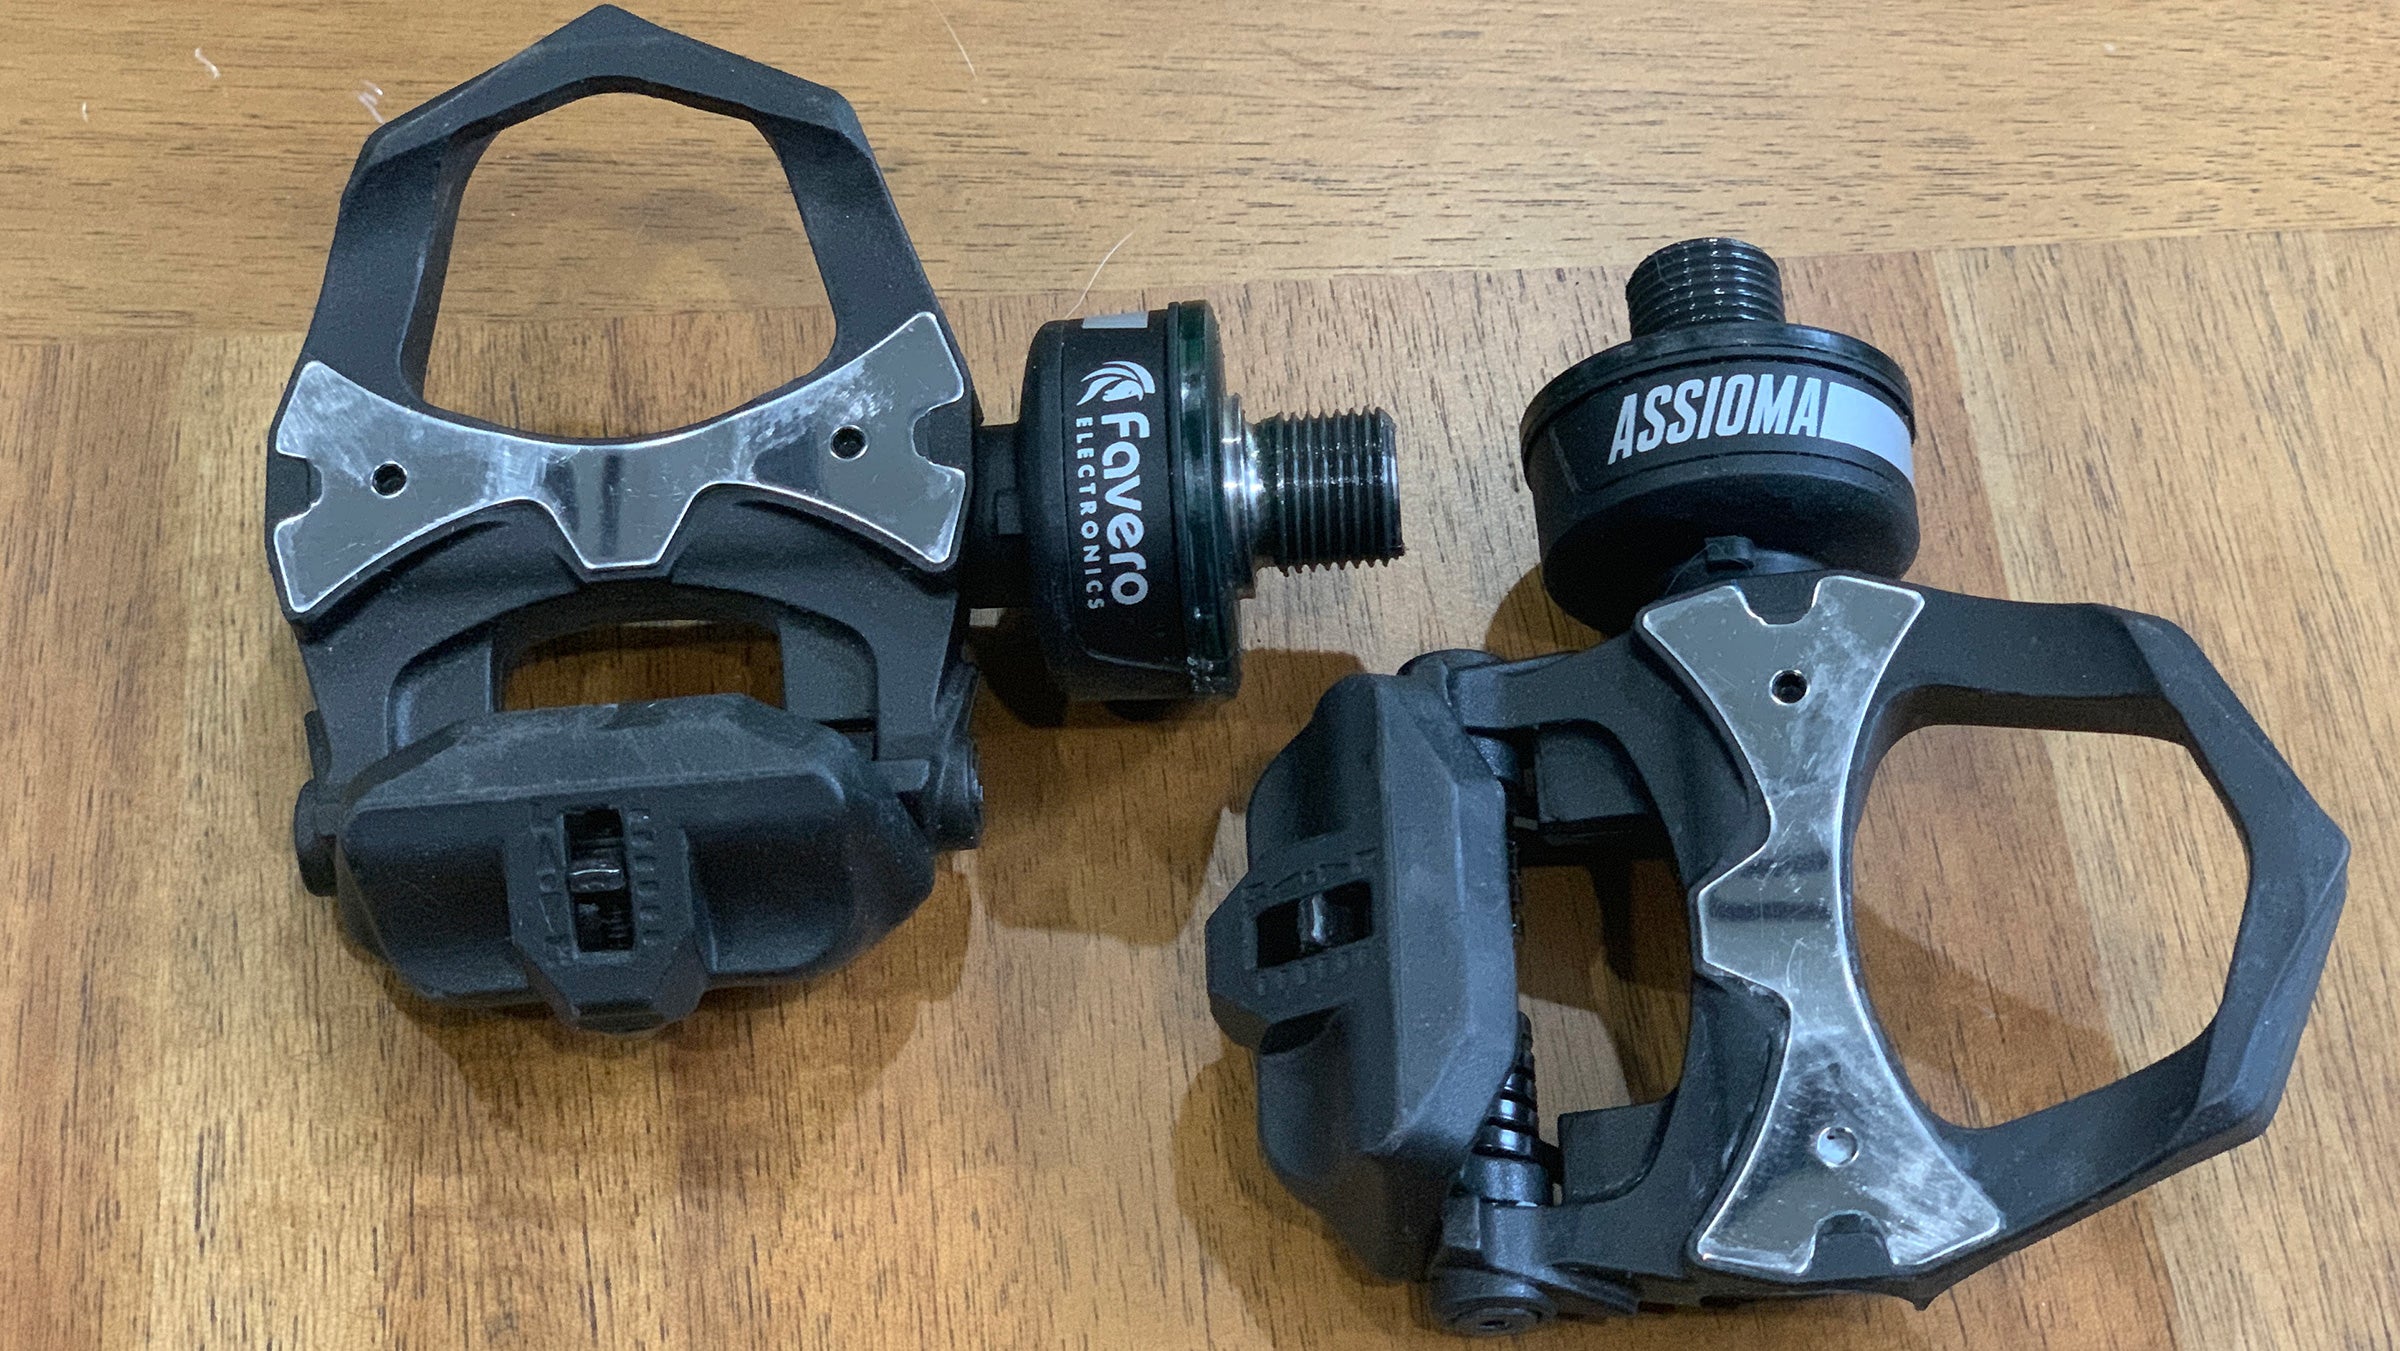 Favero Assioma Duo power meter review - Velo